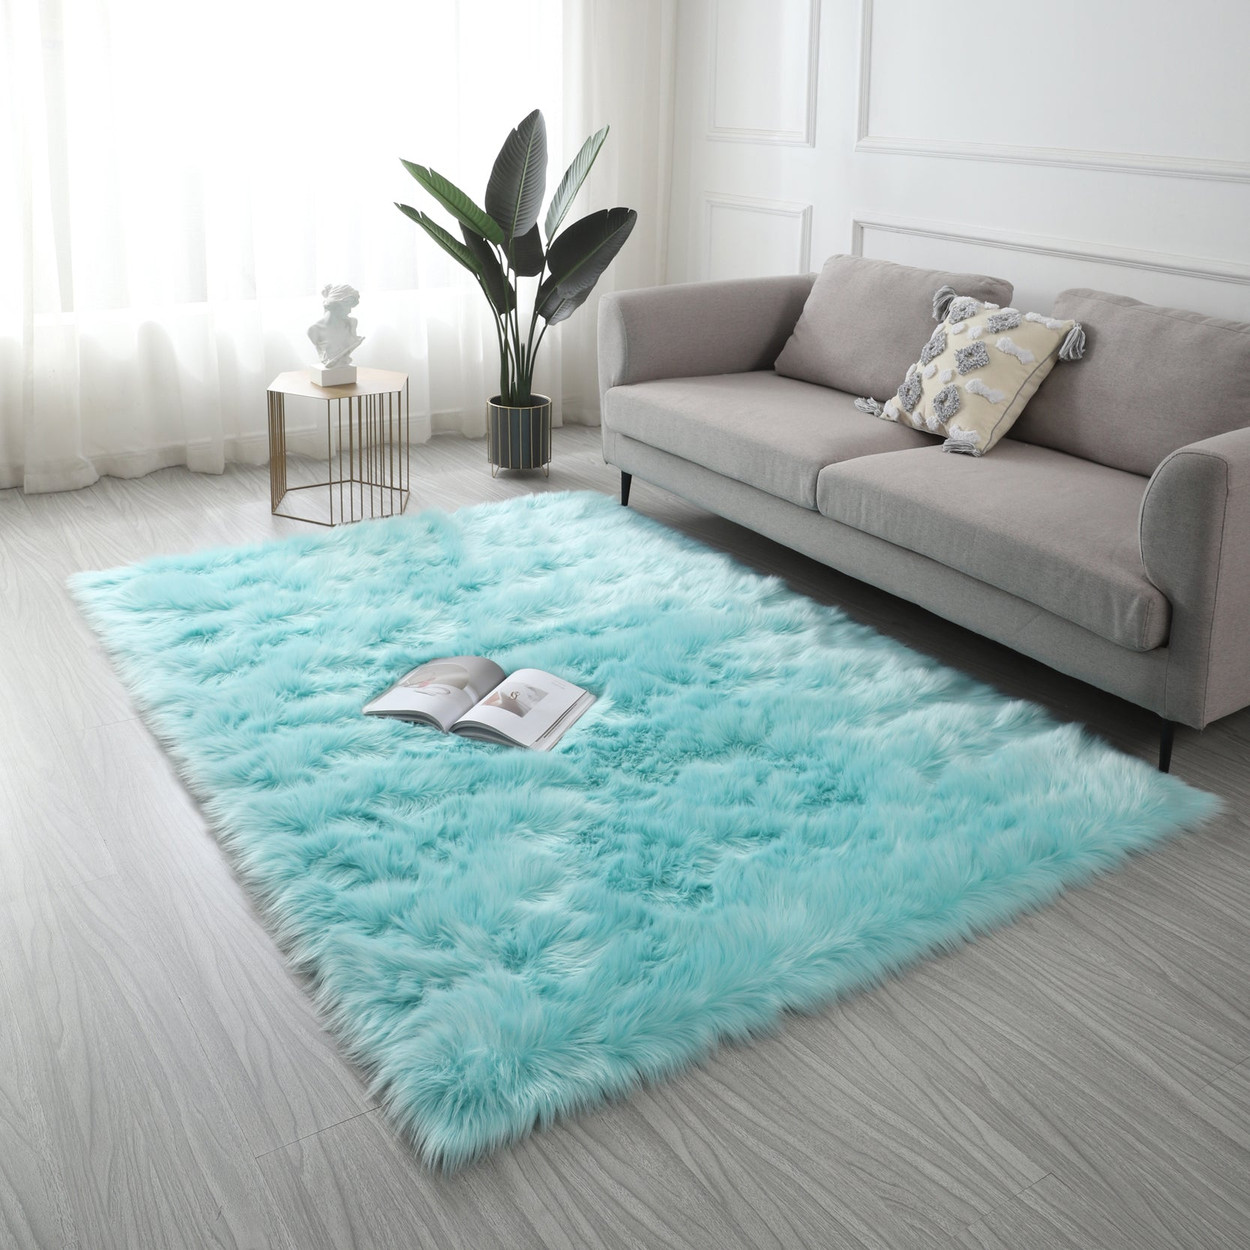 Beautiful area large rug in turquoise